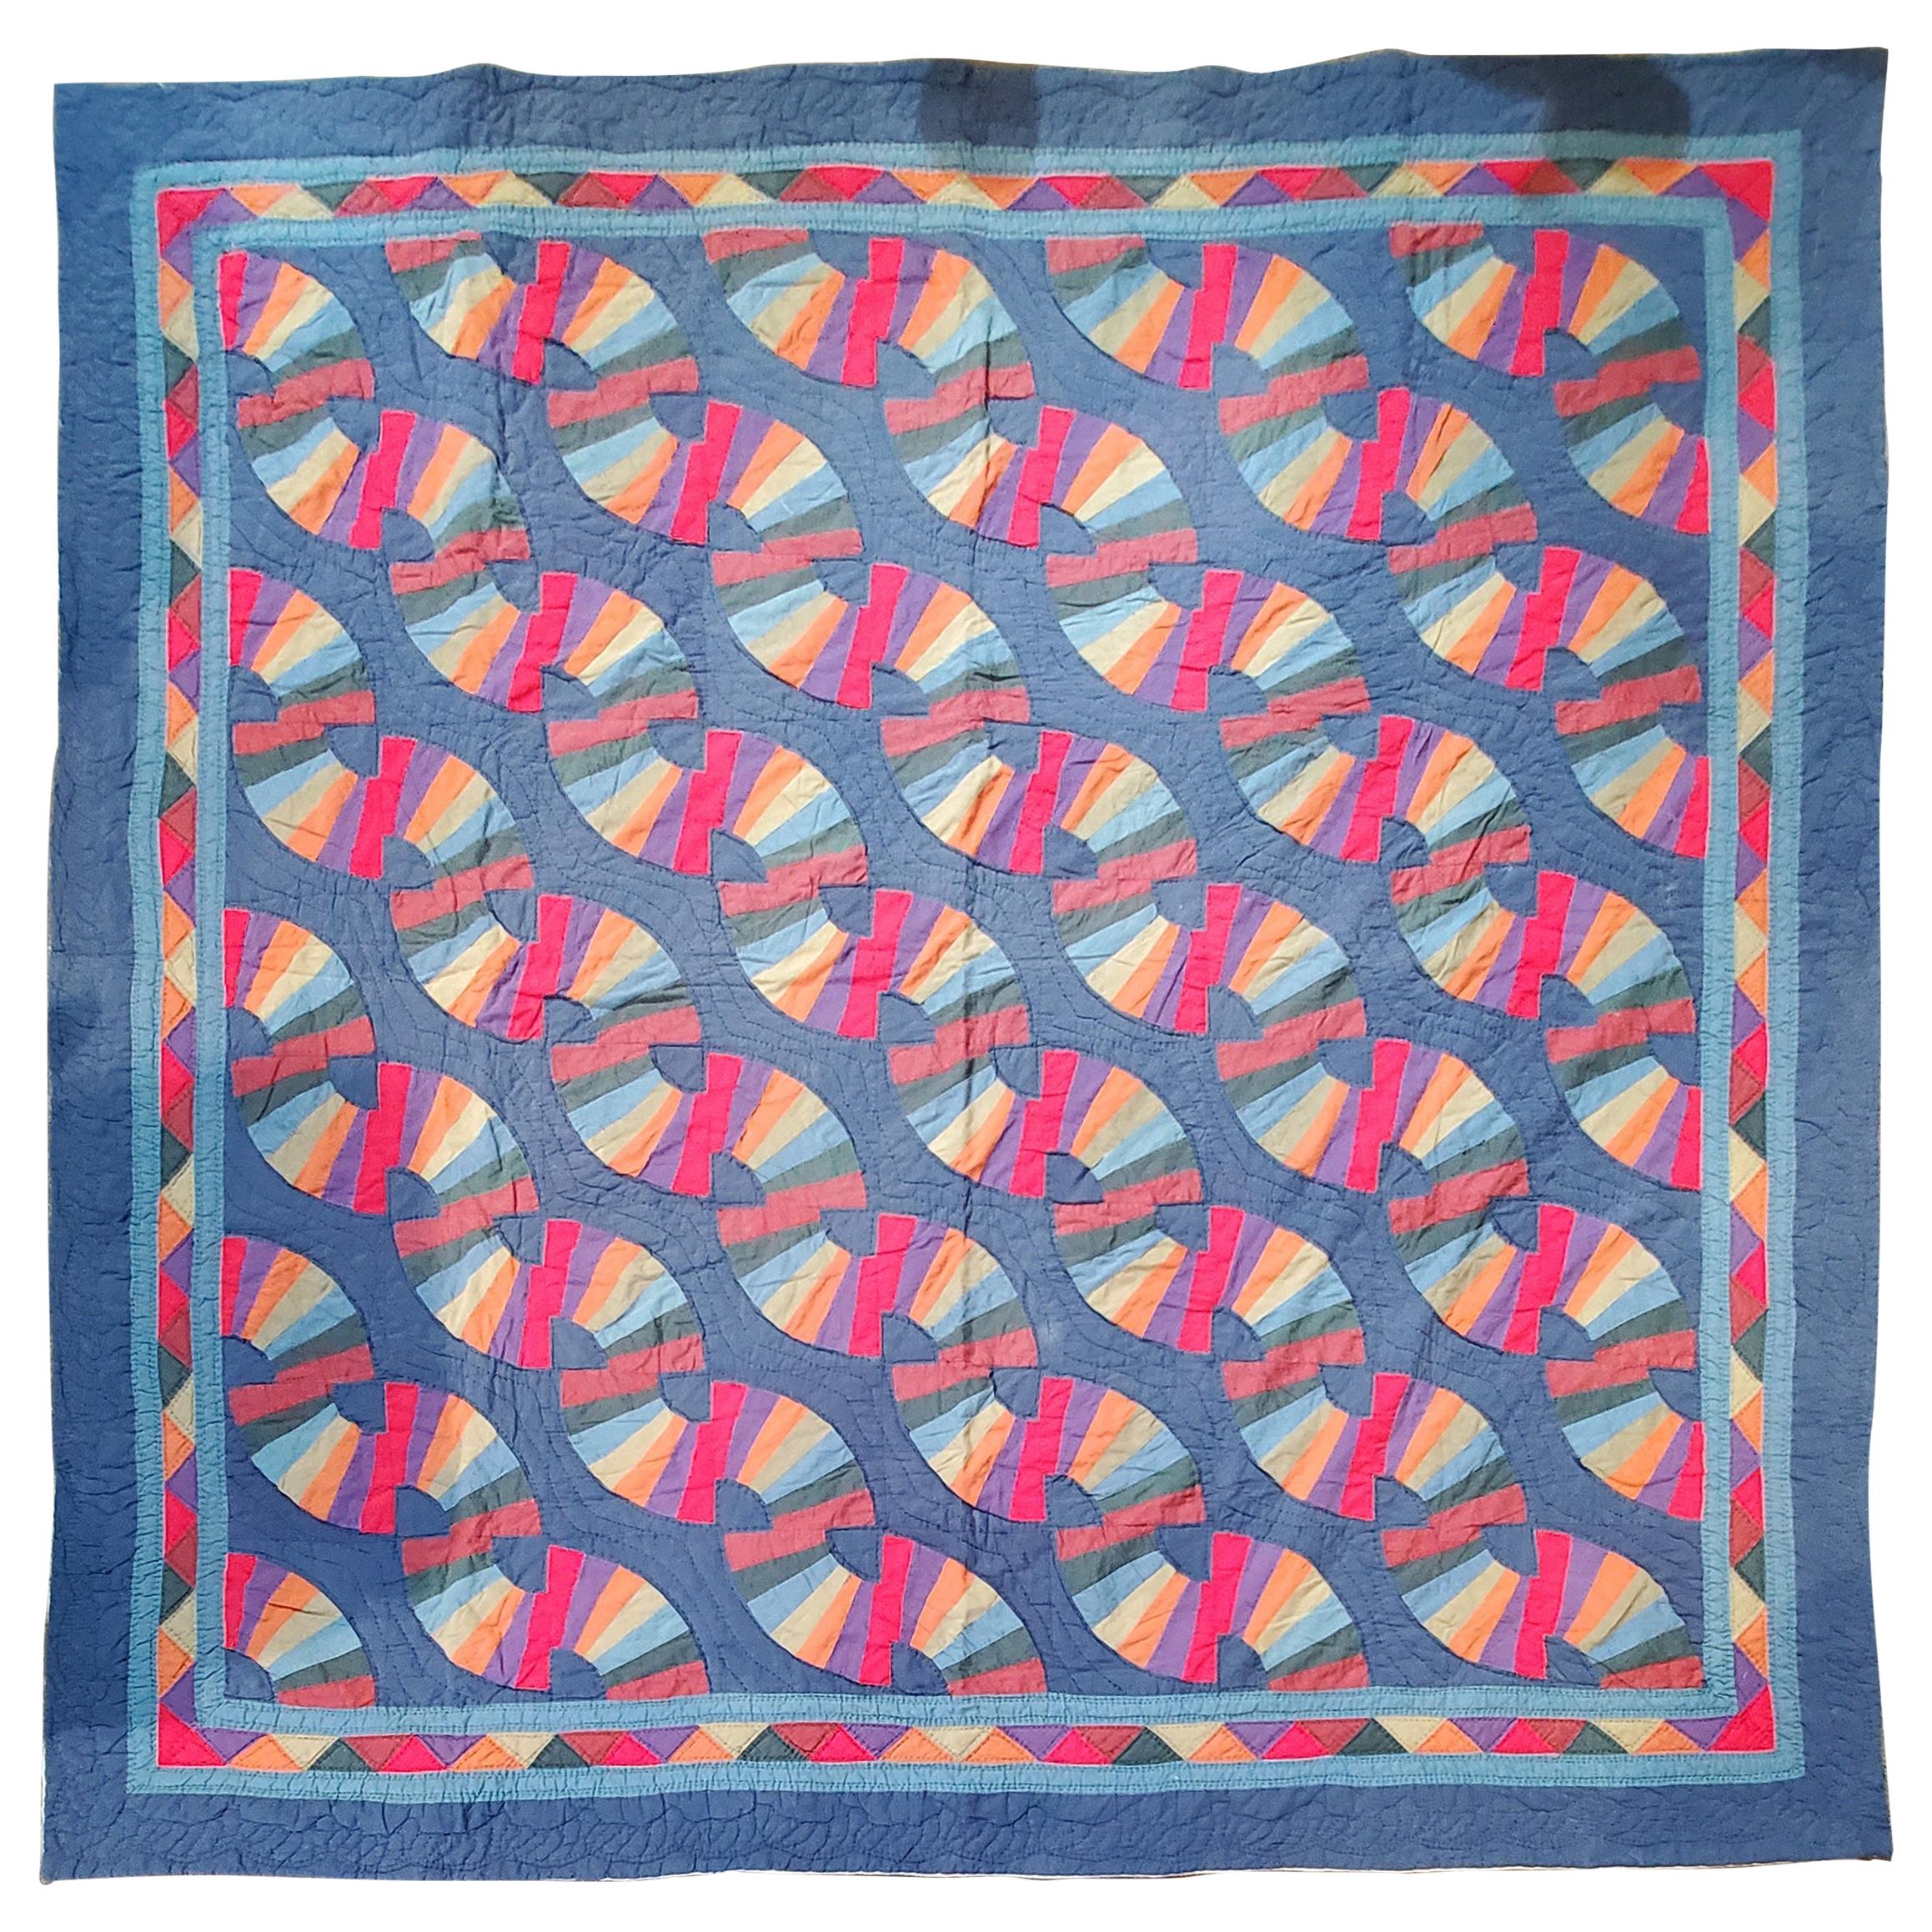 Amish Fan Quilt from Ohio, 1950s